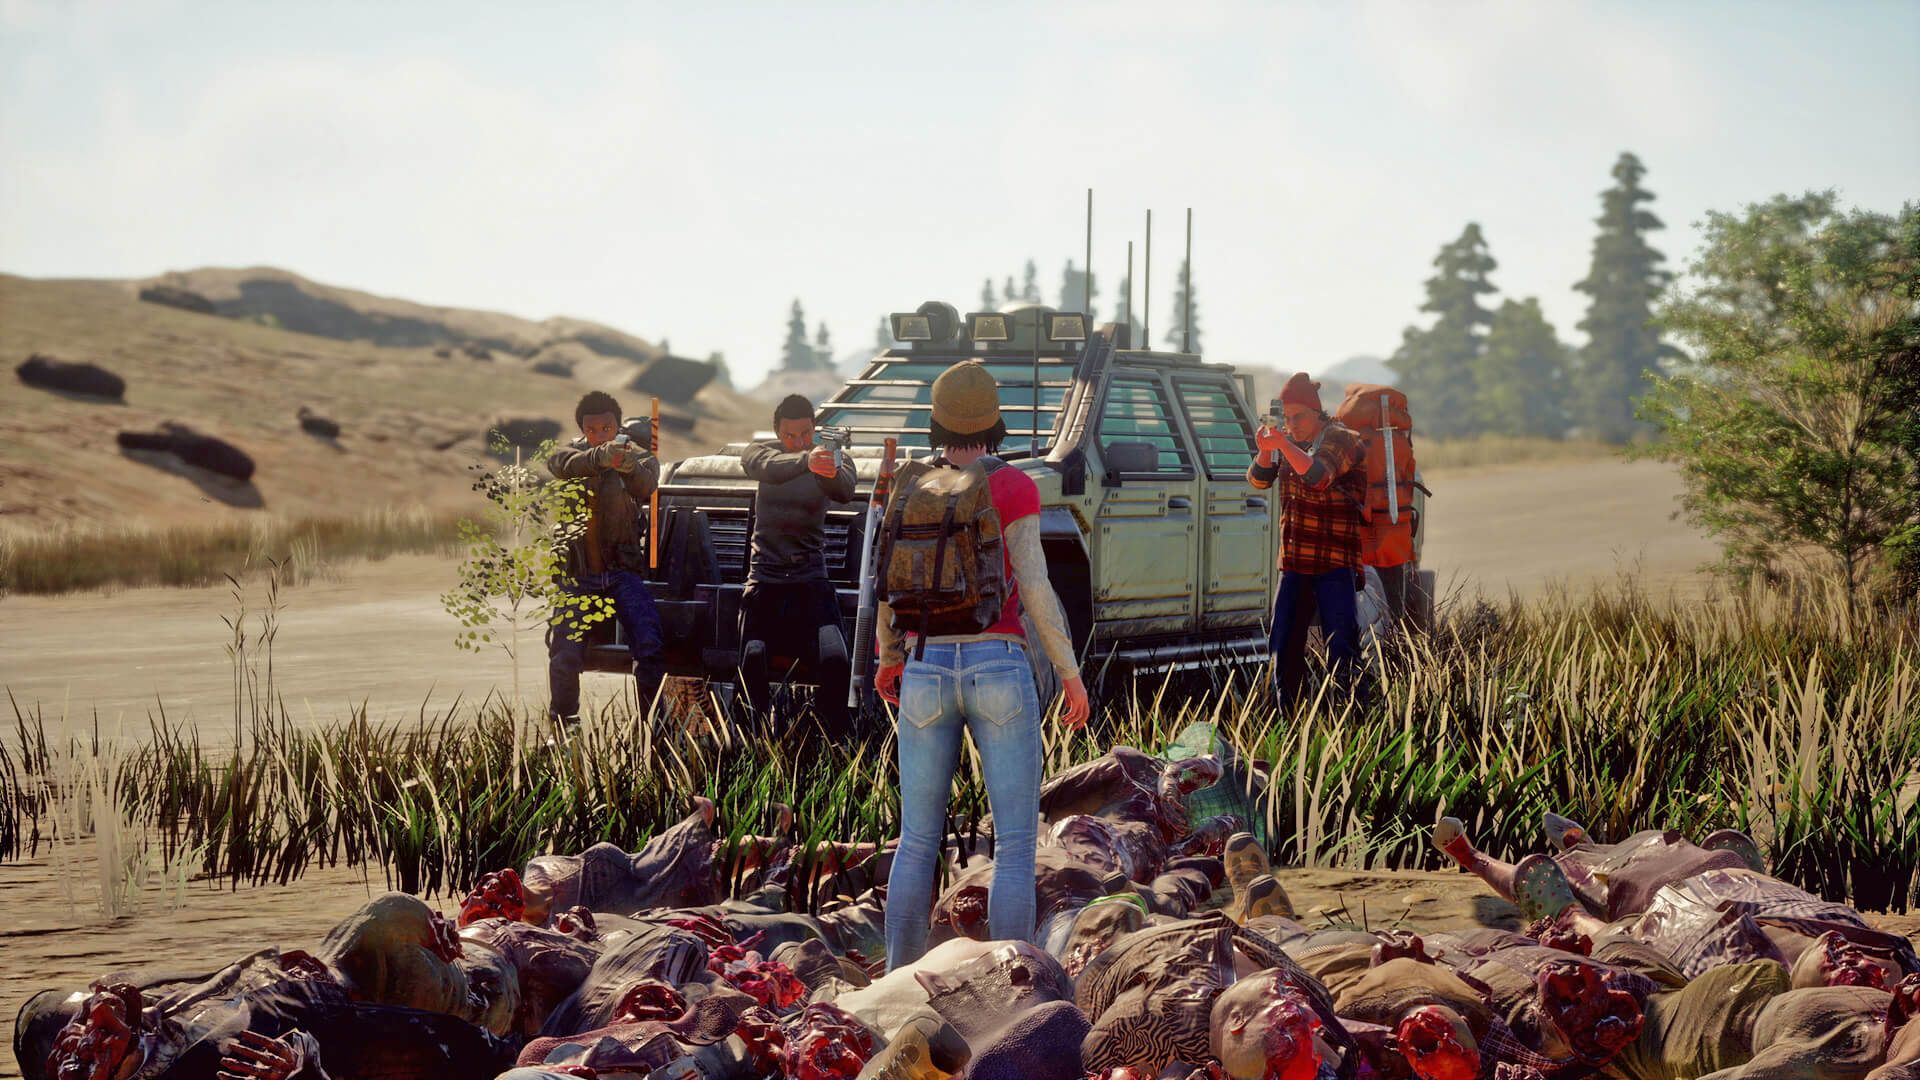 STATE OF DECAY 2, Trainer Cheat 